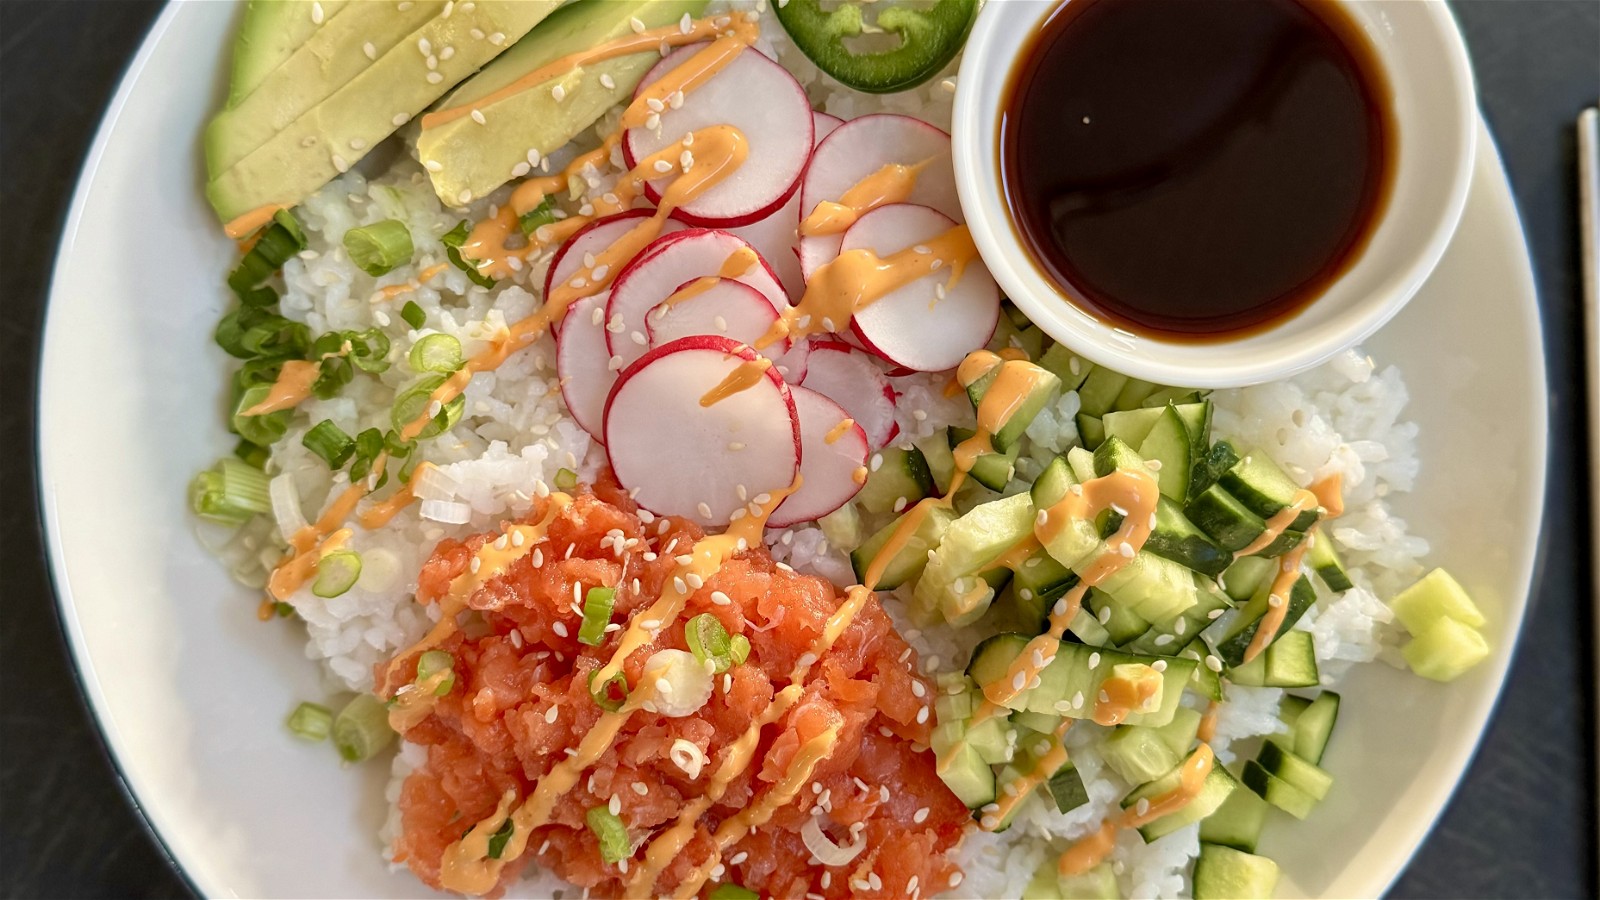 Image of Spicy Salmon Roll in a Bowl